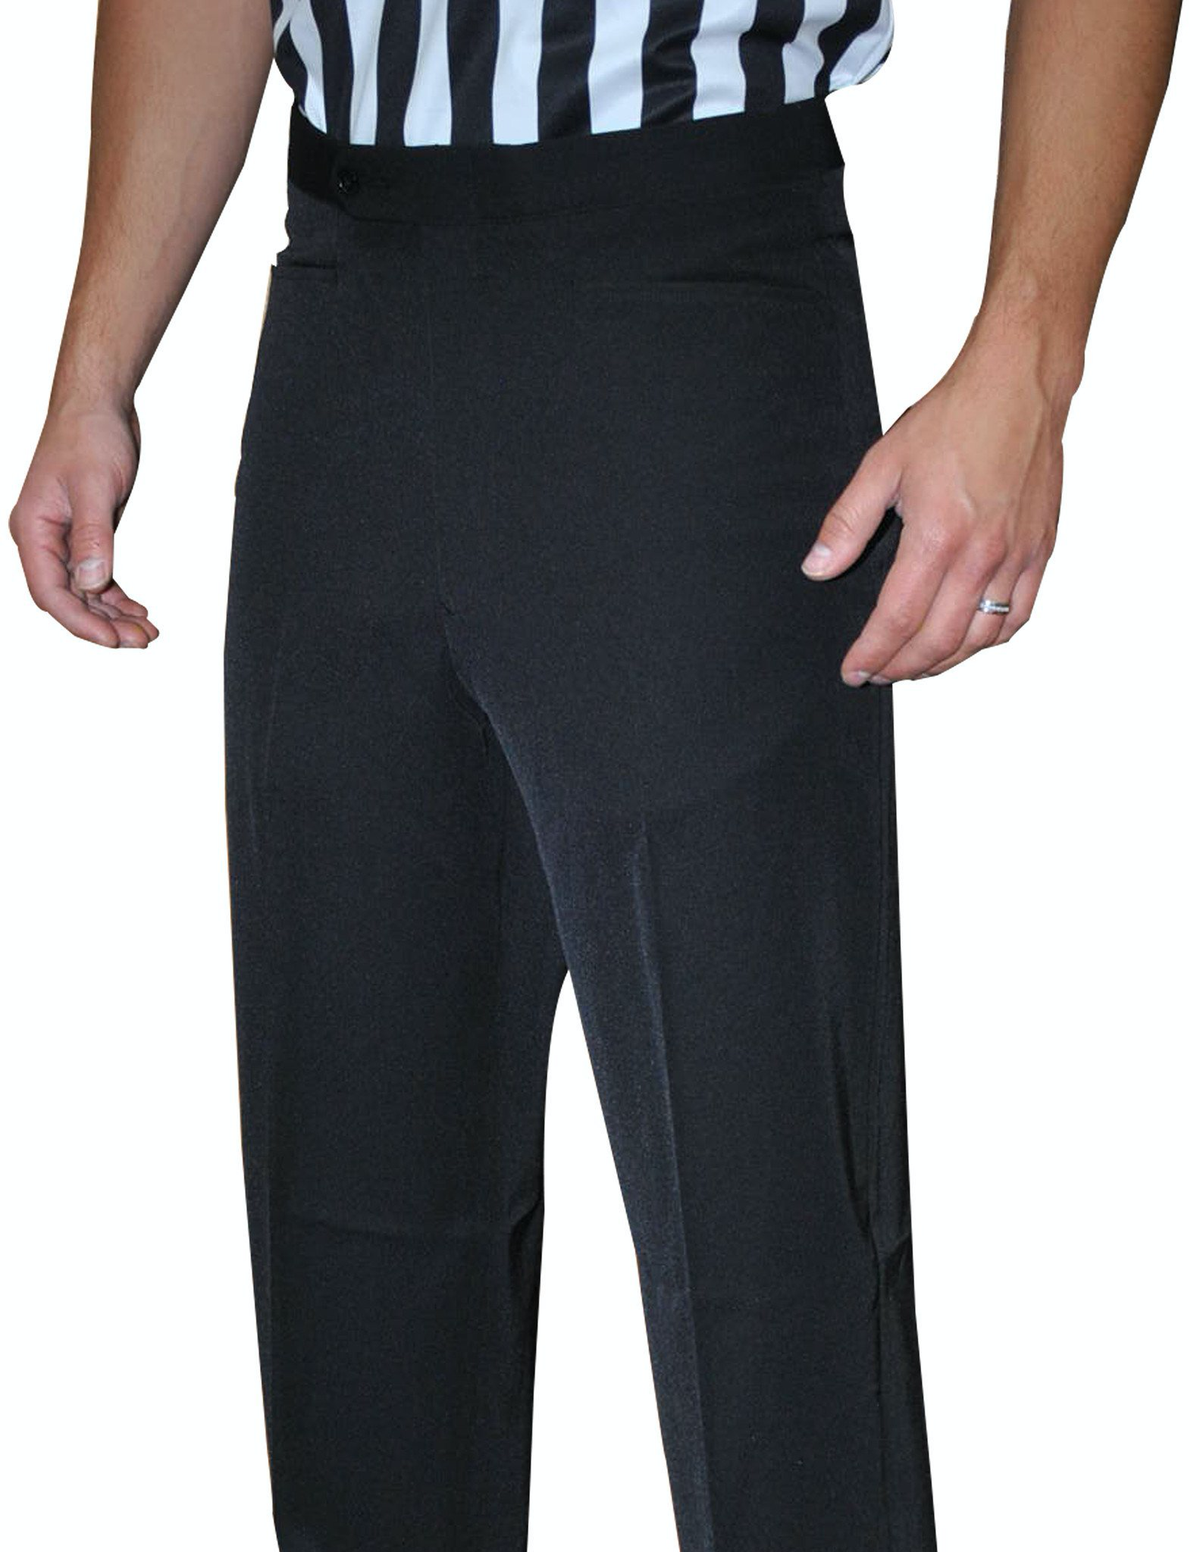 Smitty | BKS-280 | 4-Way Stretch Flat Front Referee Pants w/ Western Cut Pockets | Basketball | Wrestling - Great Call Athletics